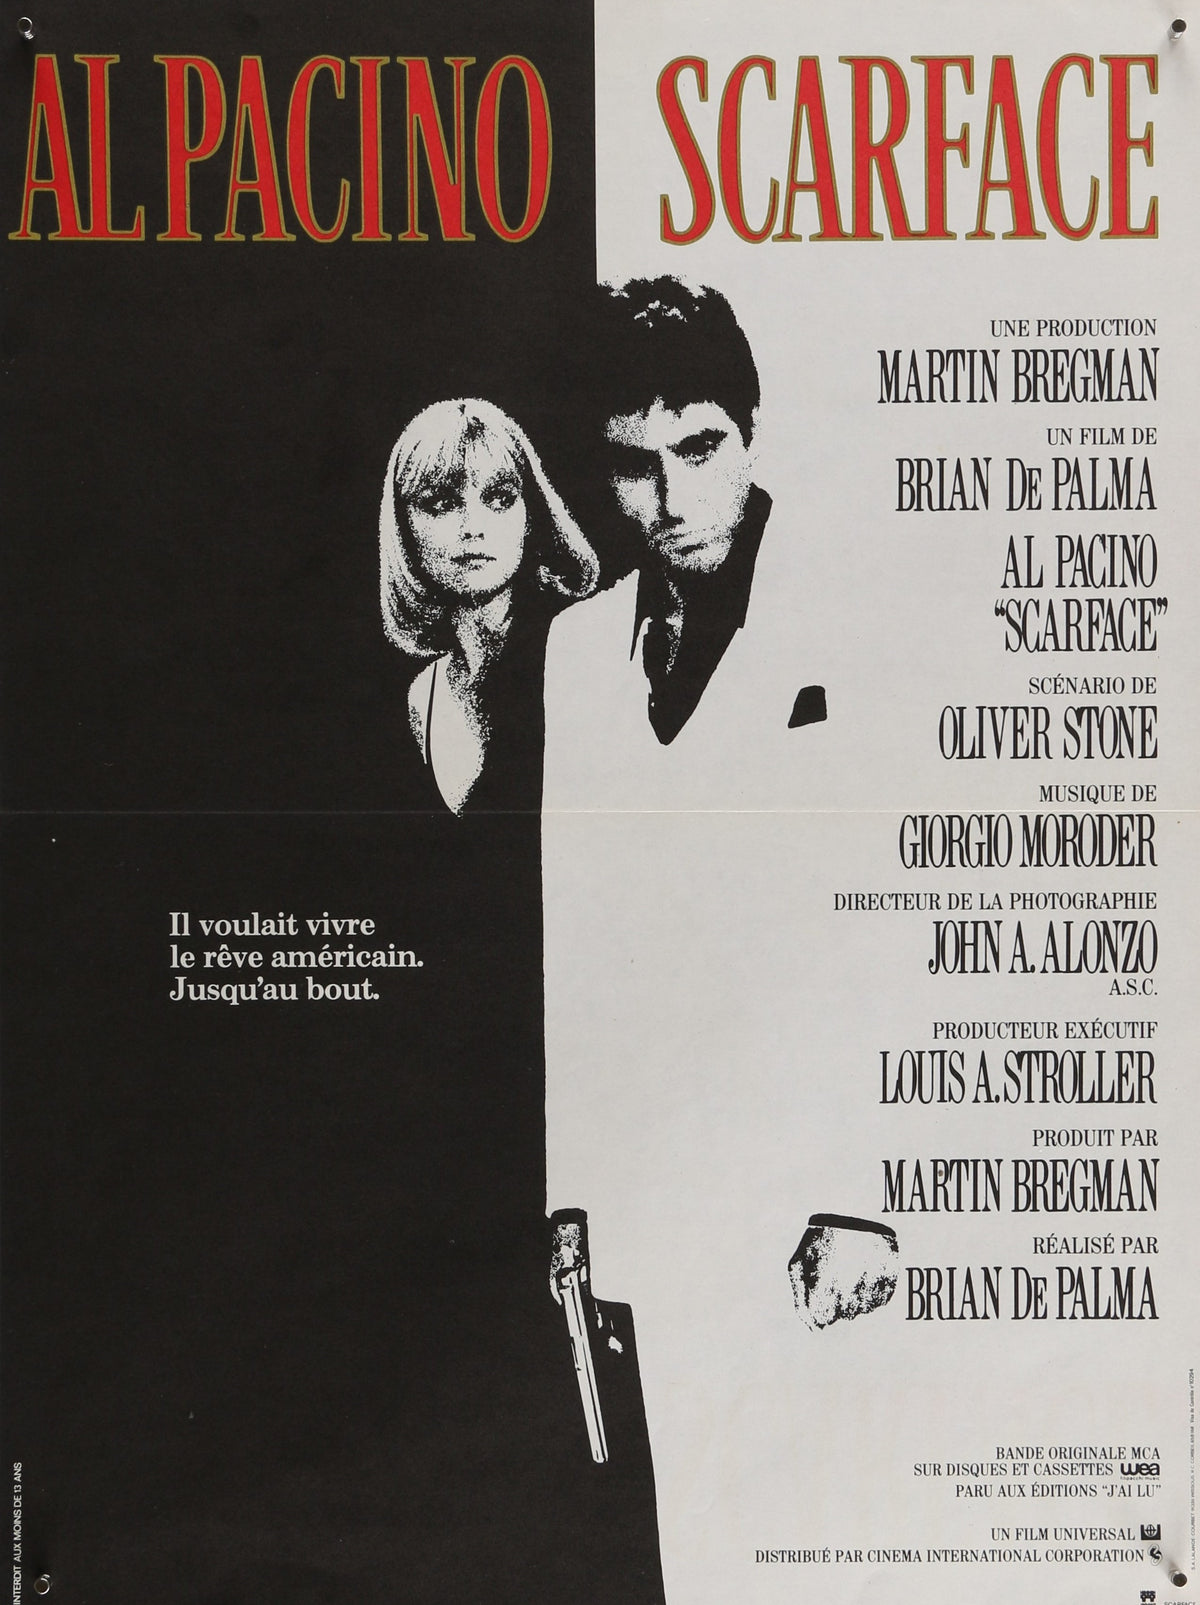 Scarface- Al Pacino - Authentic Vintage Poster